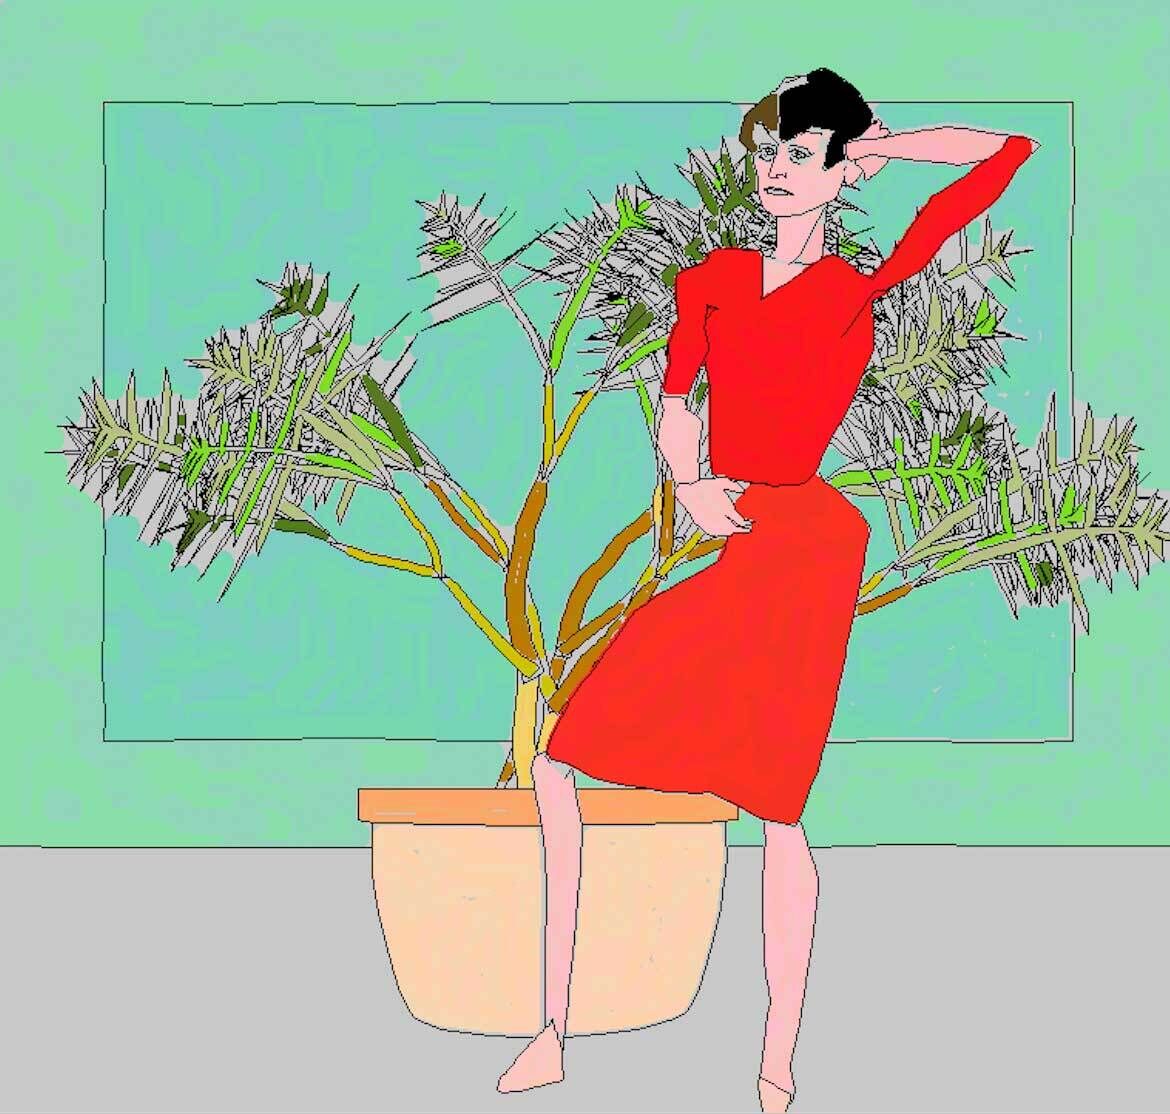 A stylized drawing of a woman in a red dress posing with her hand on her head next to a potted plant.